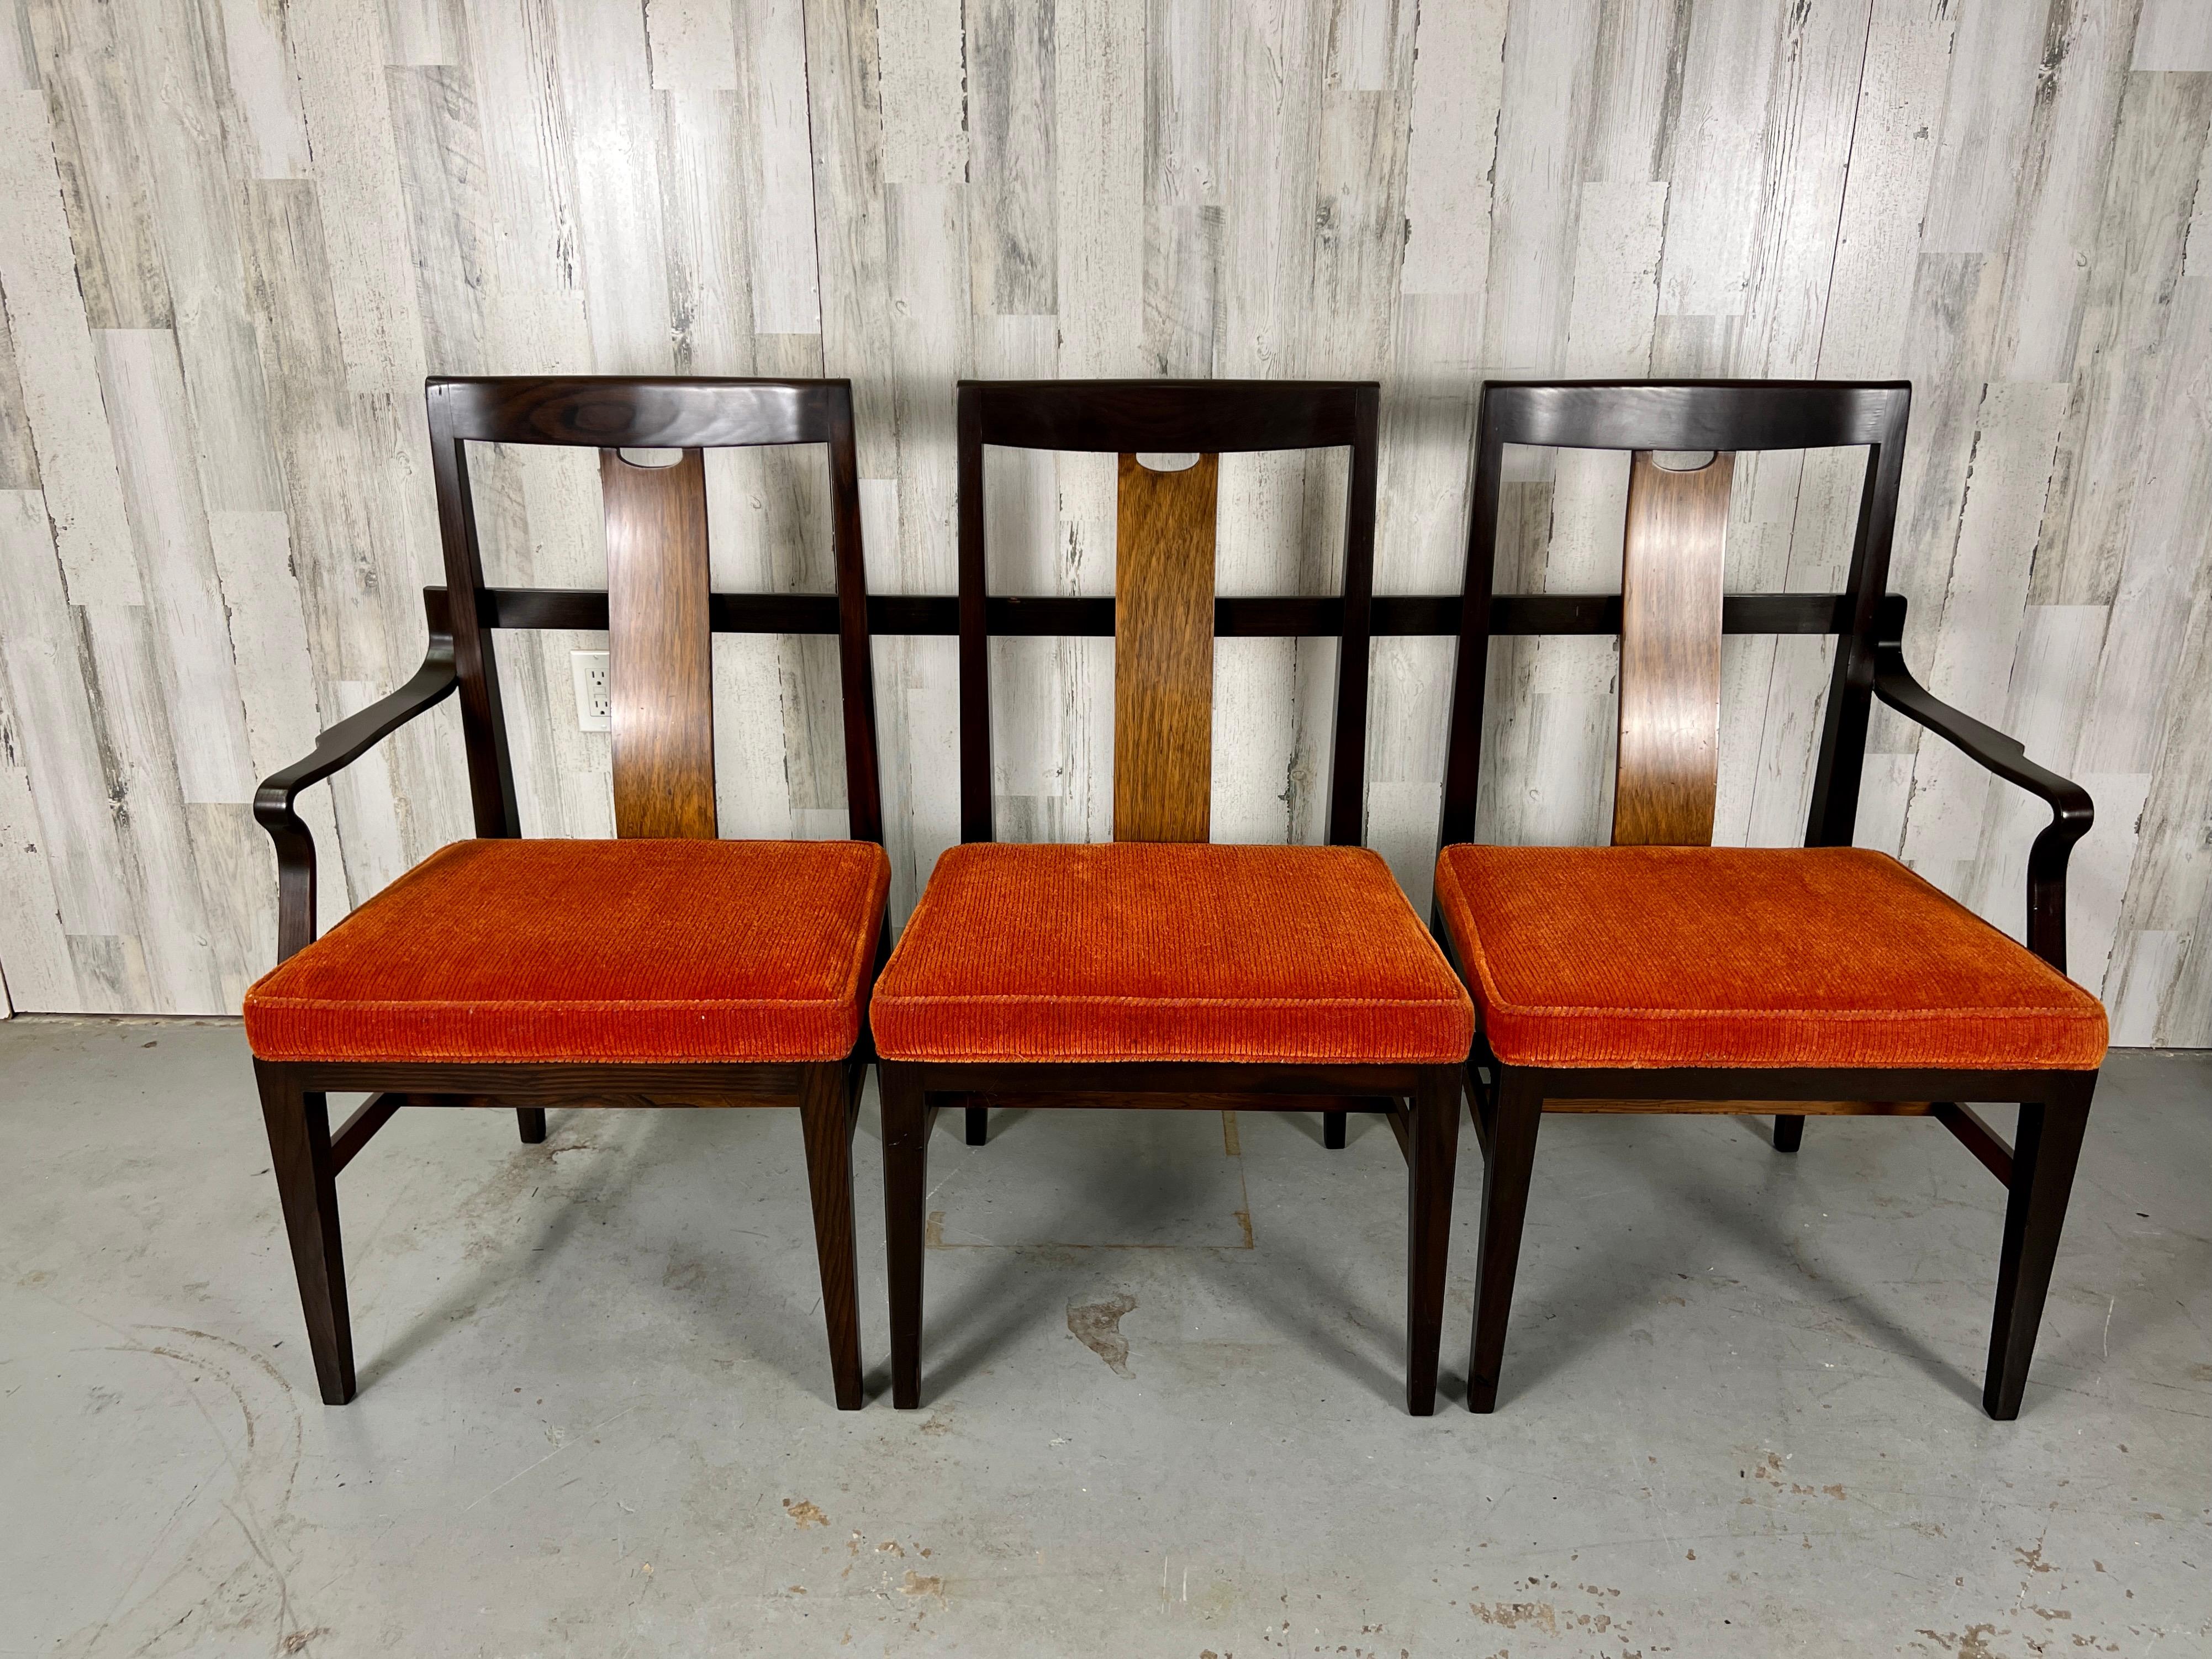 This assemblage of three chairs into a settee with bentwood arms was custom ordered by Stephens Financial for their office in Michigan. New upholstery may be desired.